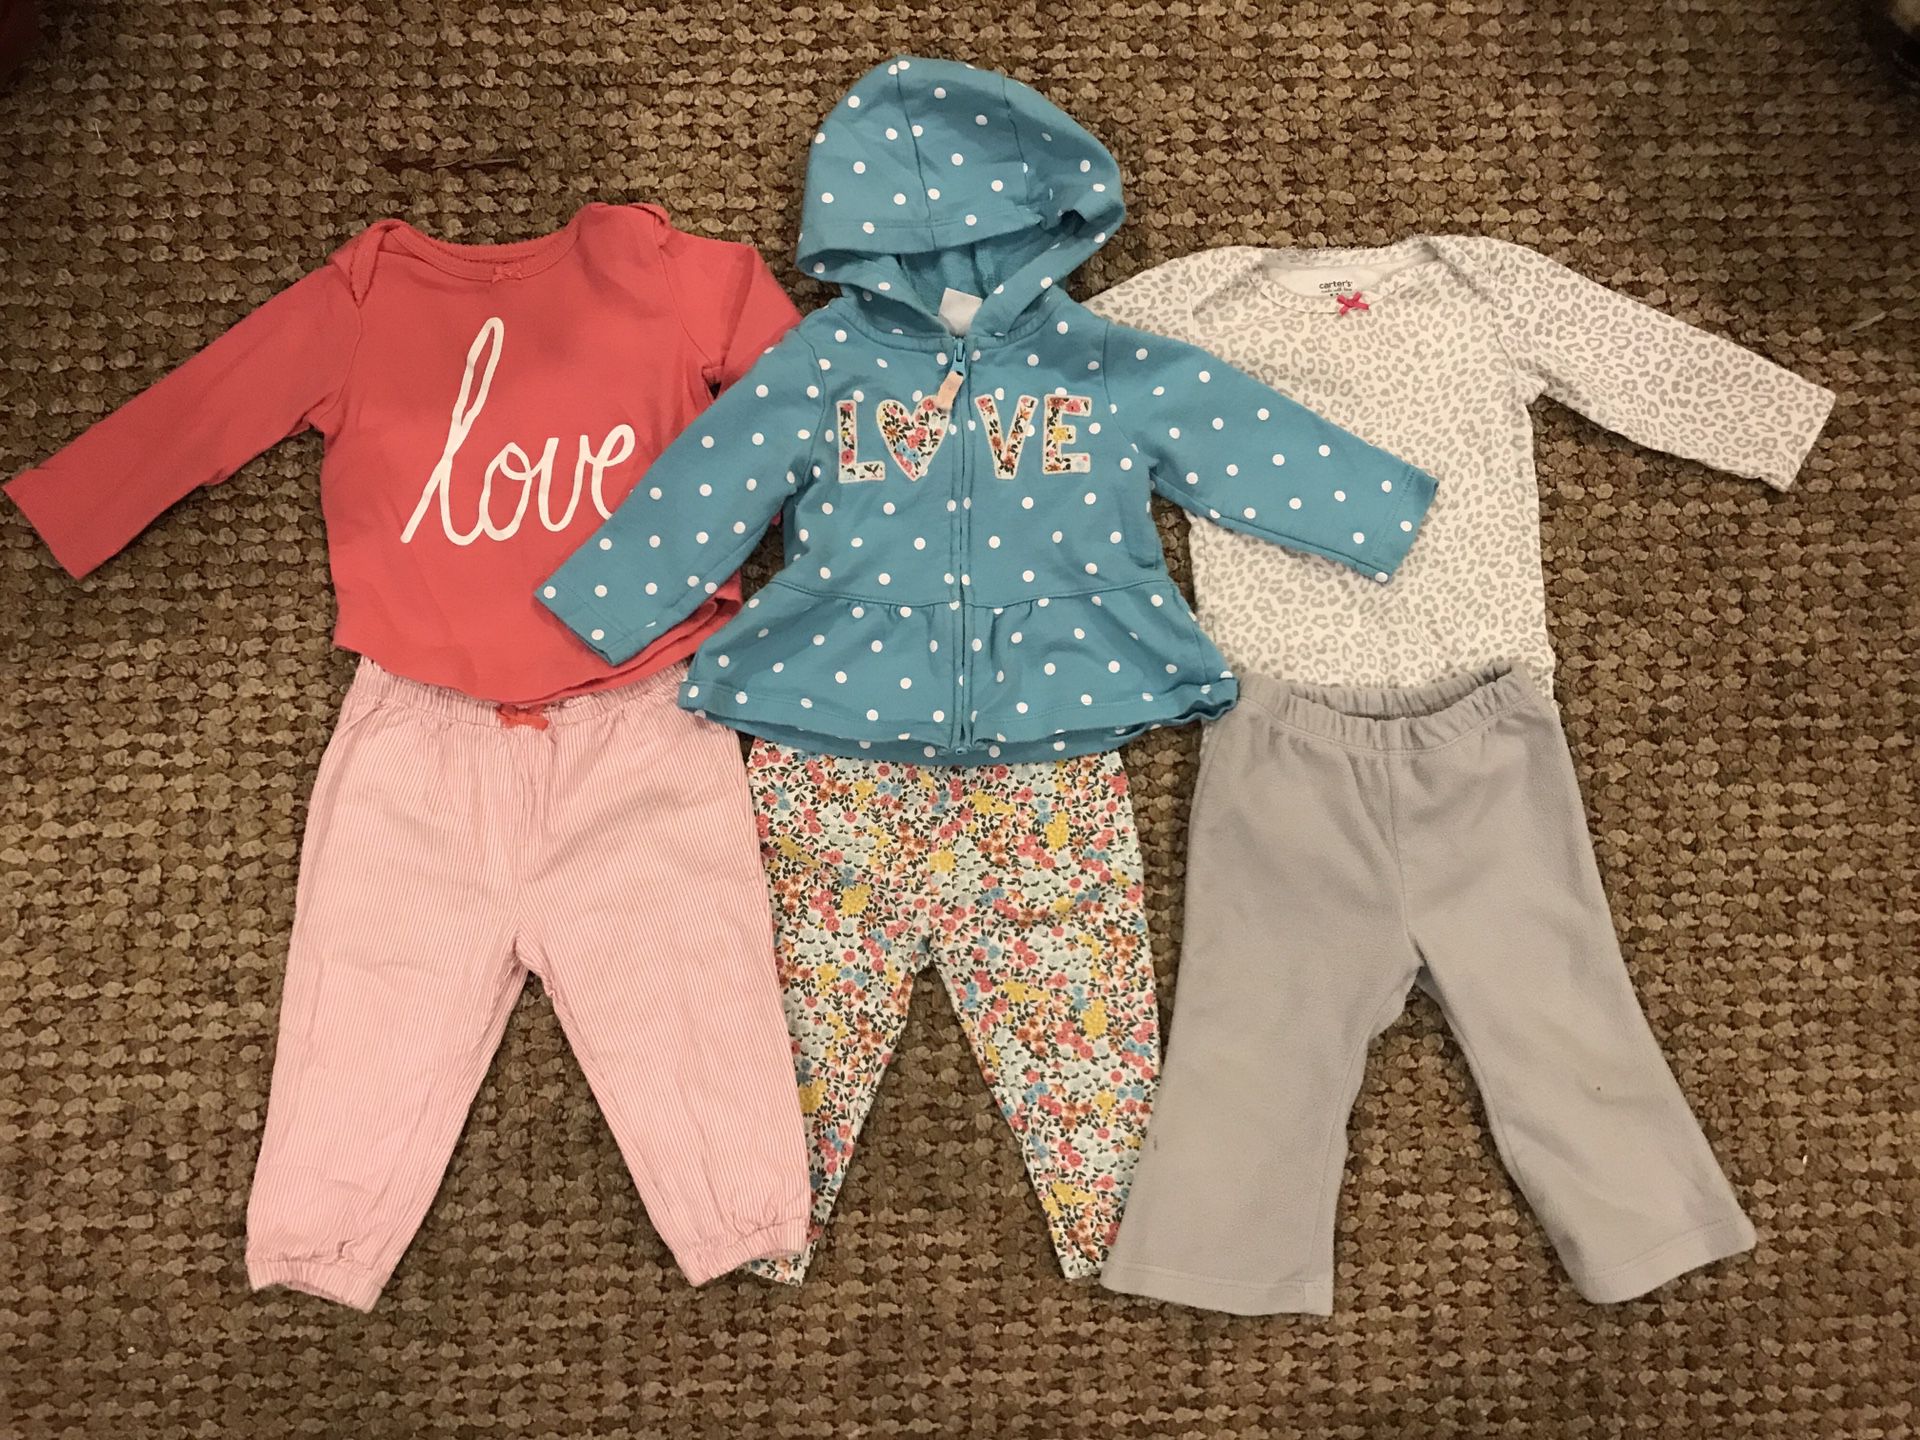 9 mo Girl’s Outfits